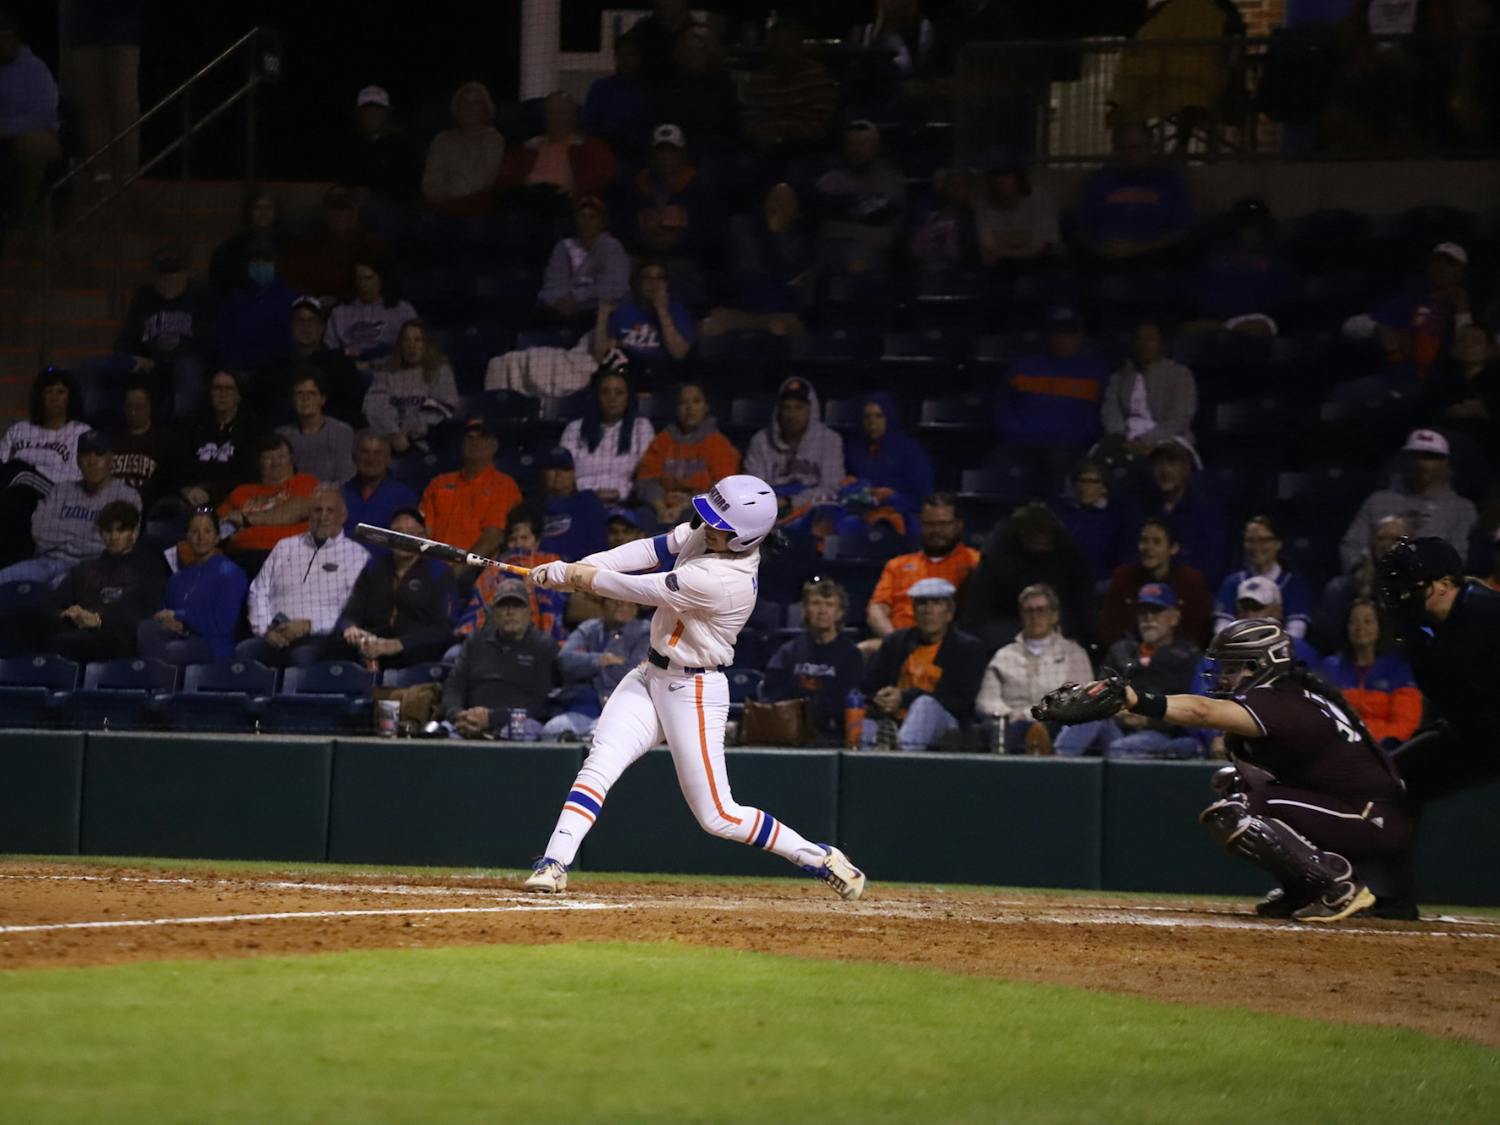 No.6 Florida fell to the hands of the No. 14 Tennessee Volunteers Saturday for its first conference loss of the year.